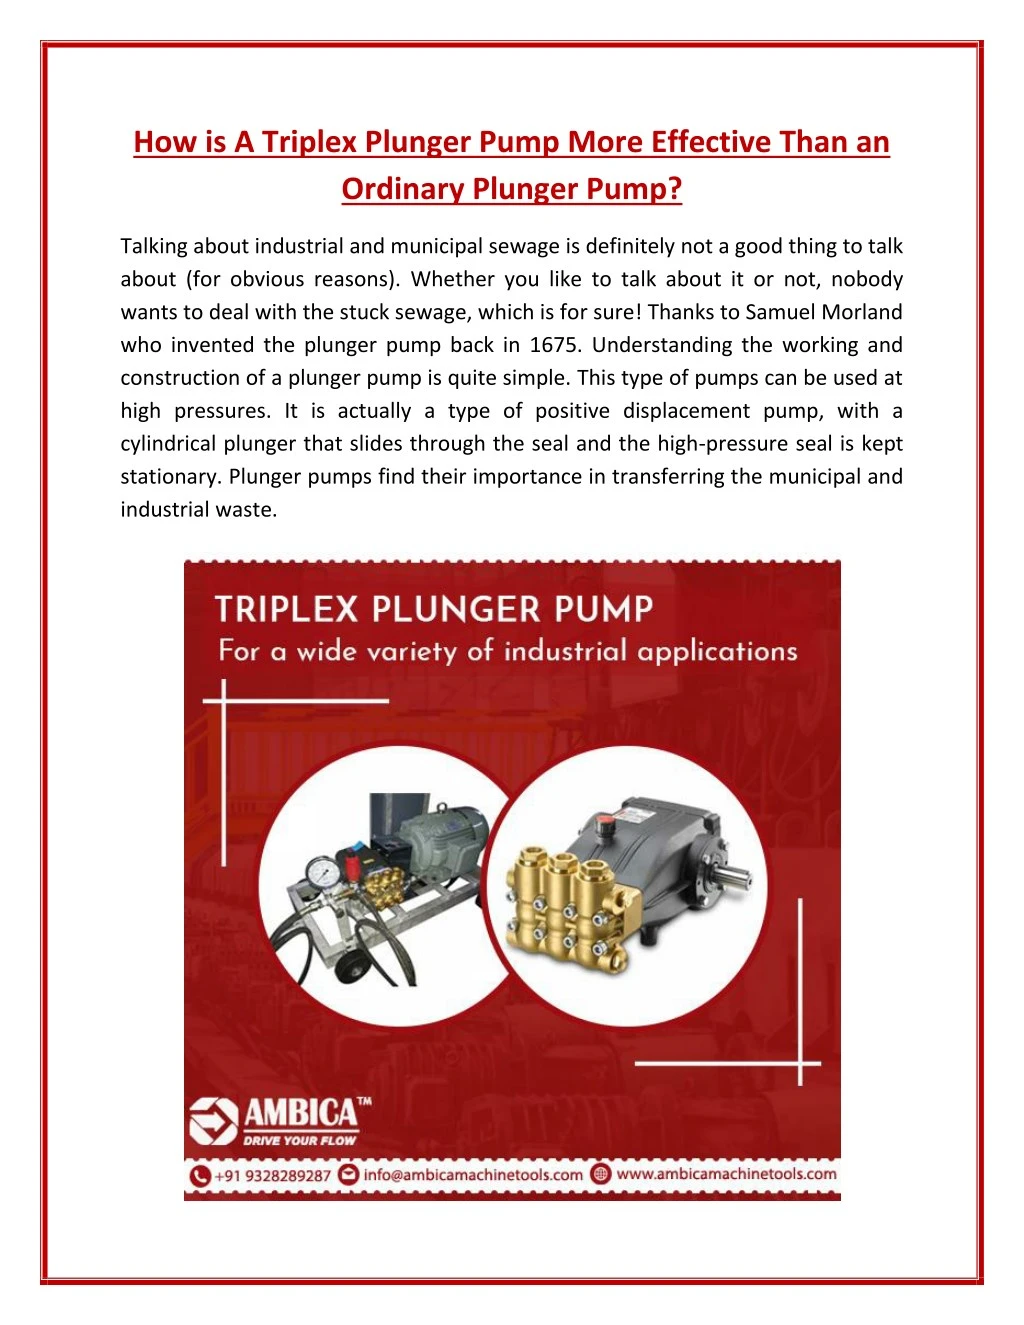 how is a triplex plunger pump more effective than